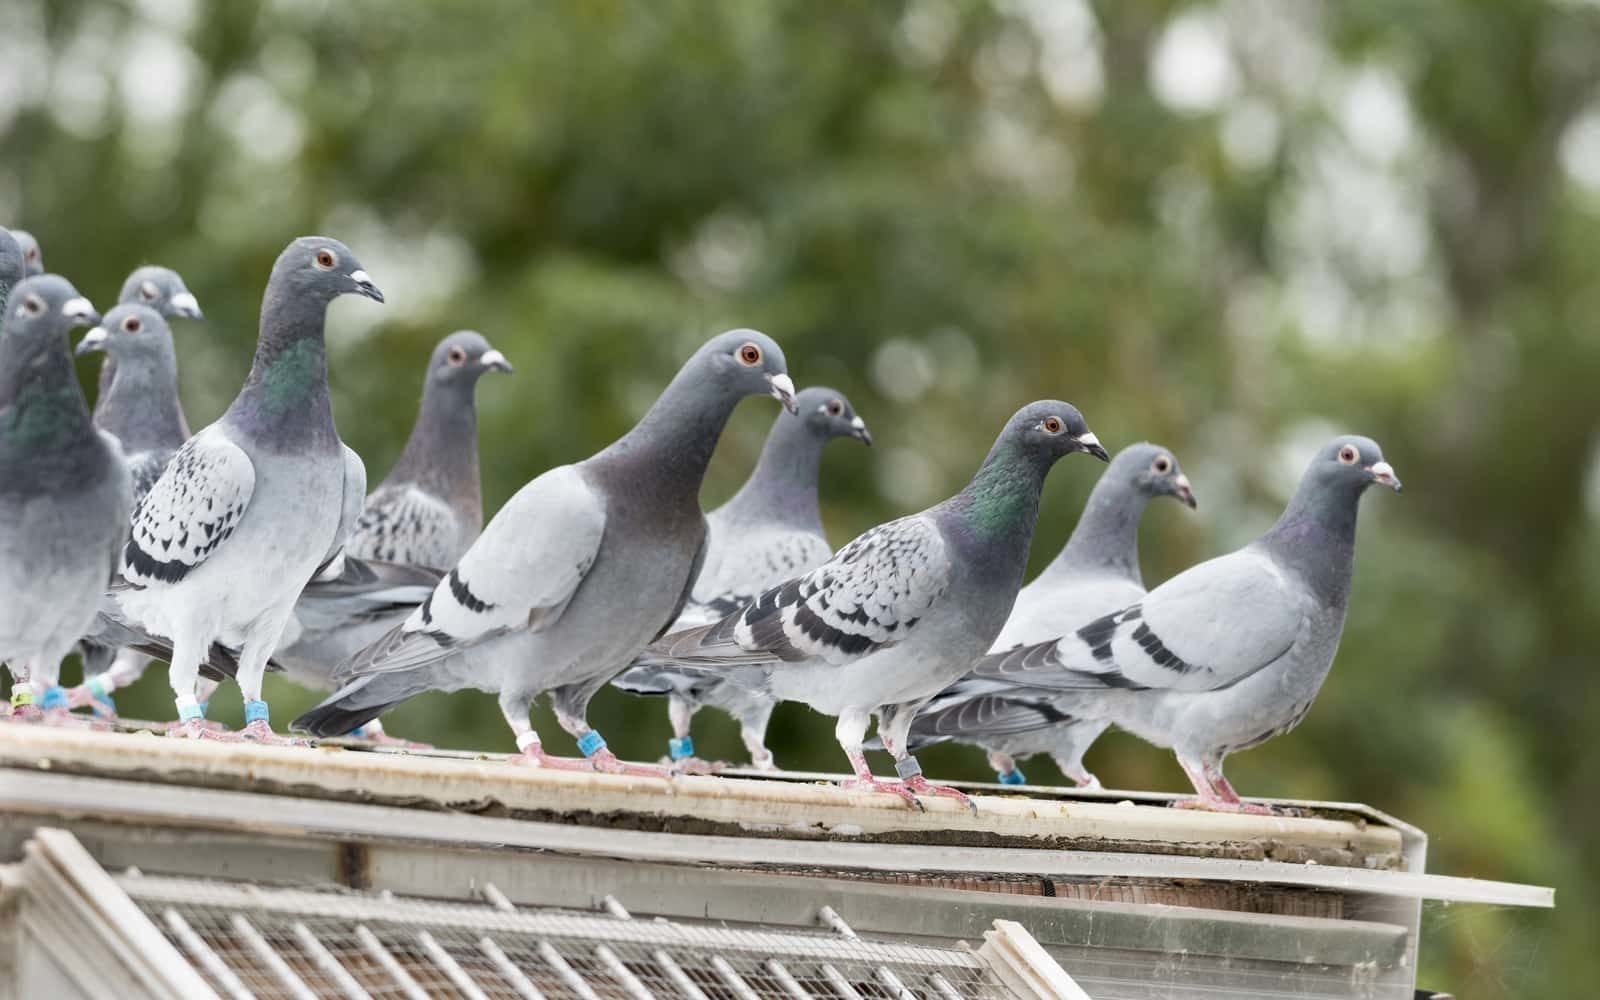 How to get rid of pigeons - pigeon repellent